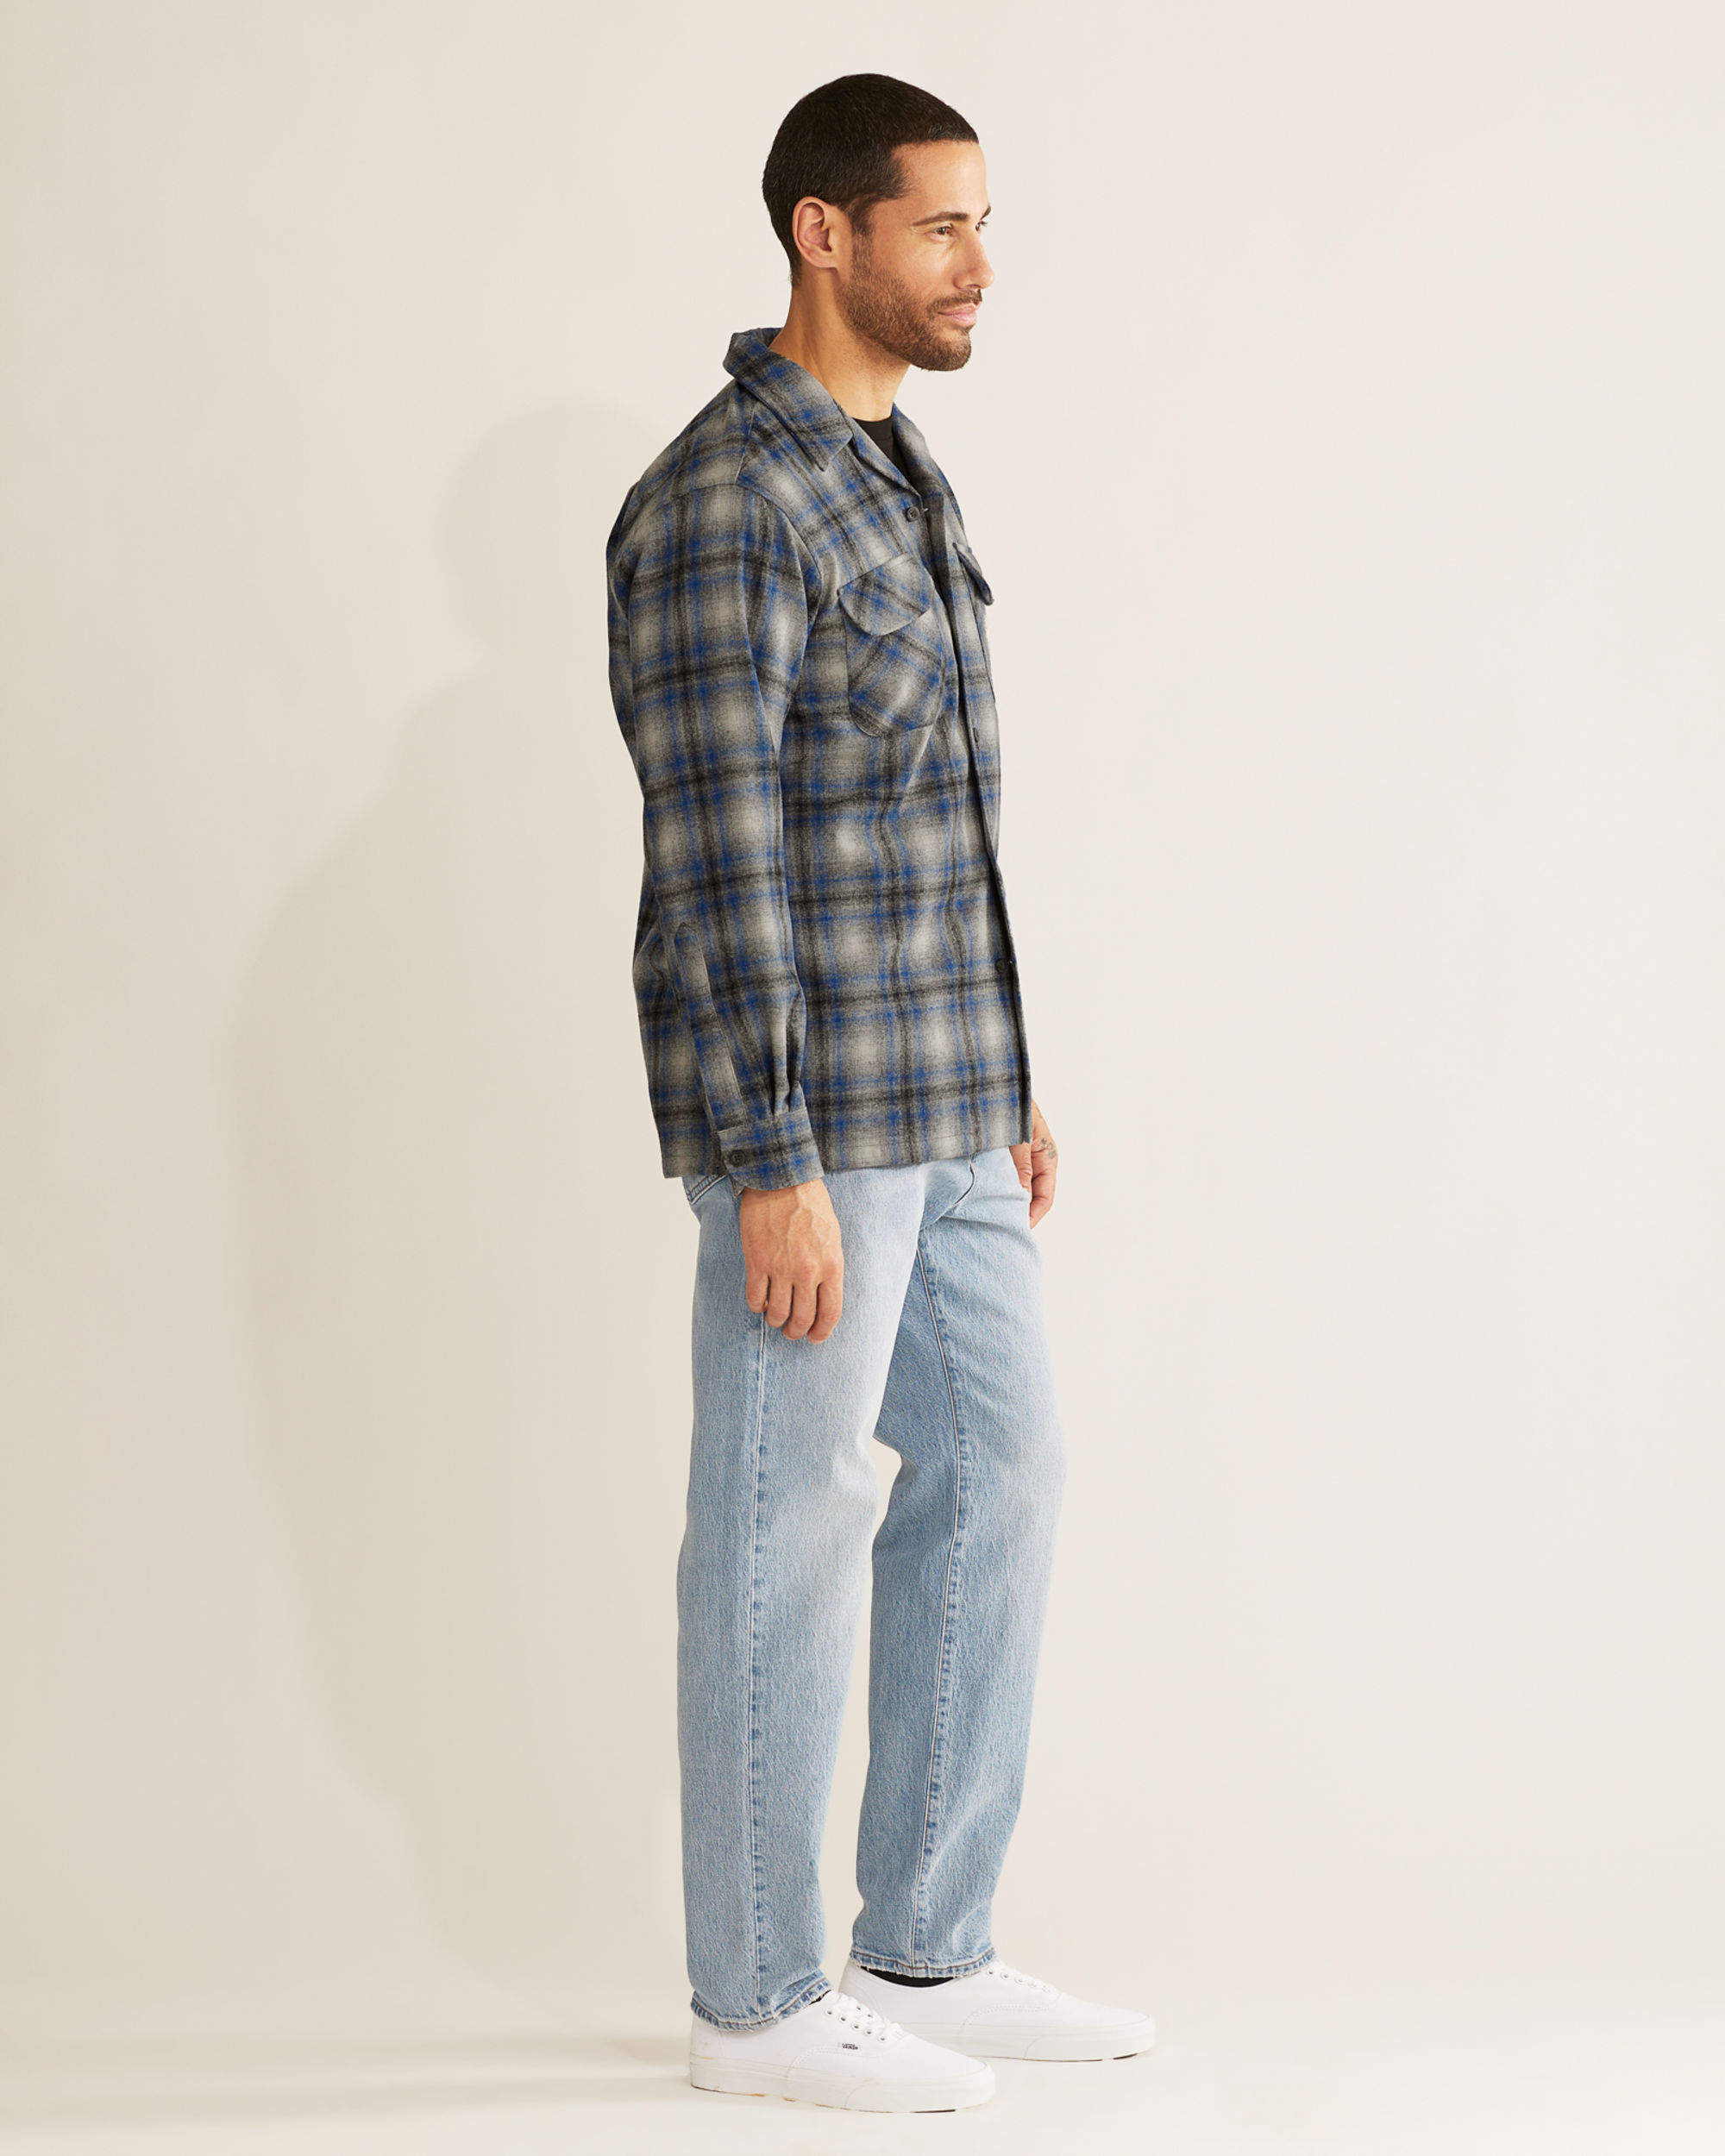 Men's Plaid Board Shirt: Perfect for Outdoor Adventures | Pendleton ...